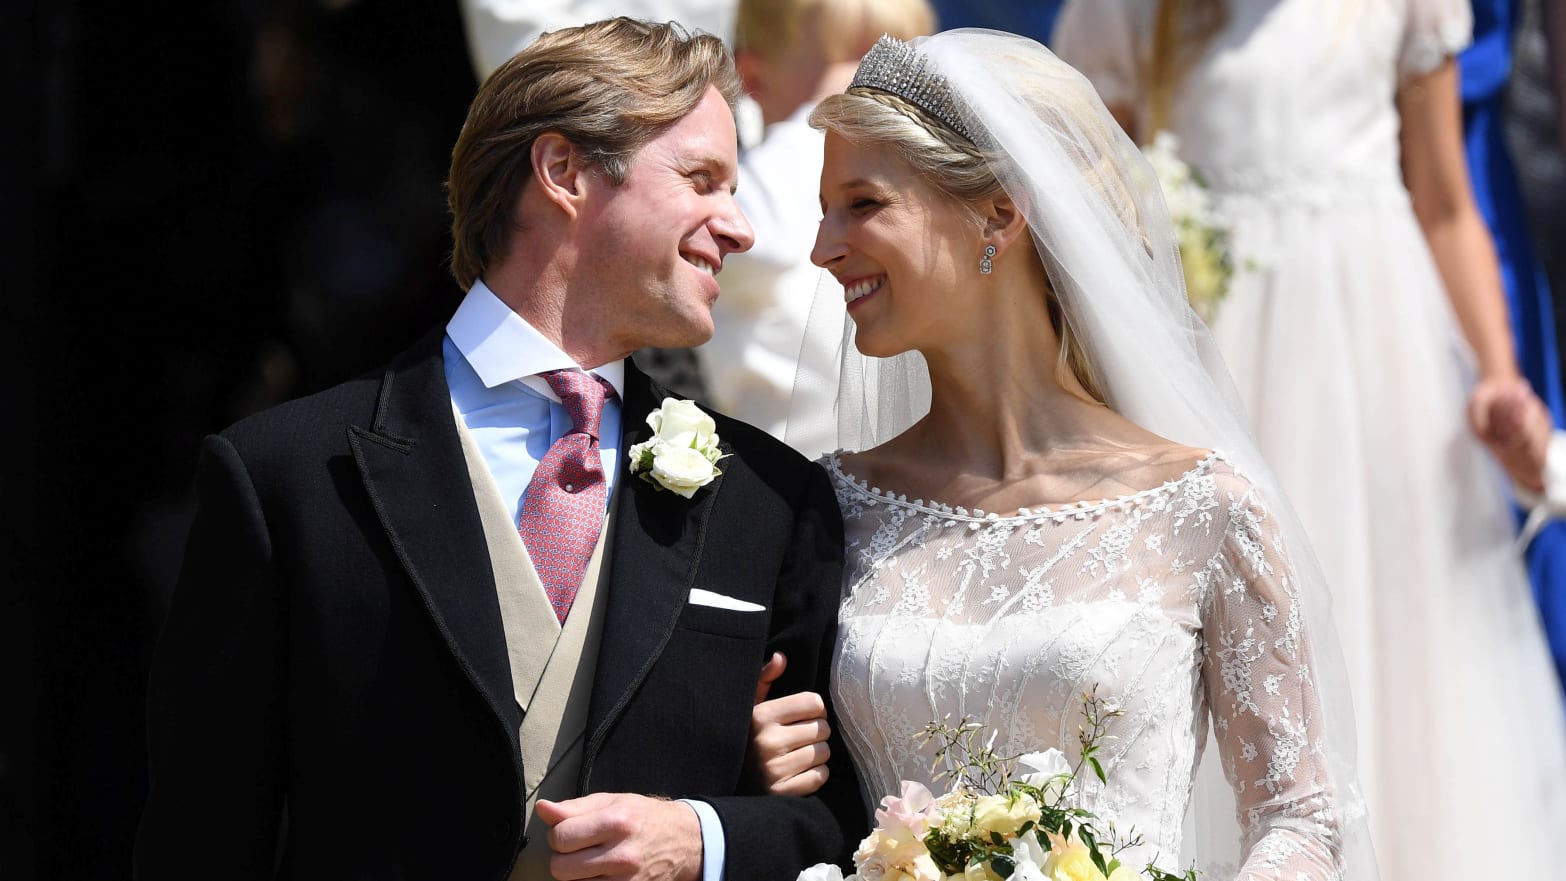 Lady Gabriella Windsor and Thomas Kingston leave St George’s Chapel after their wedding.